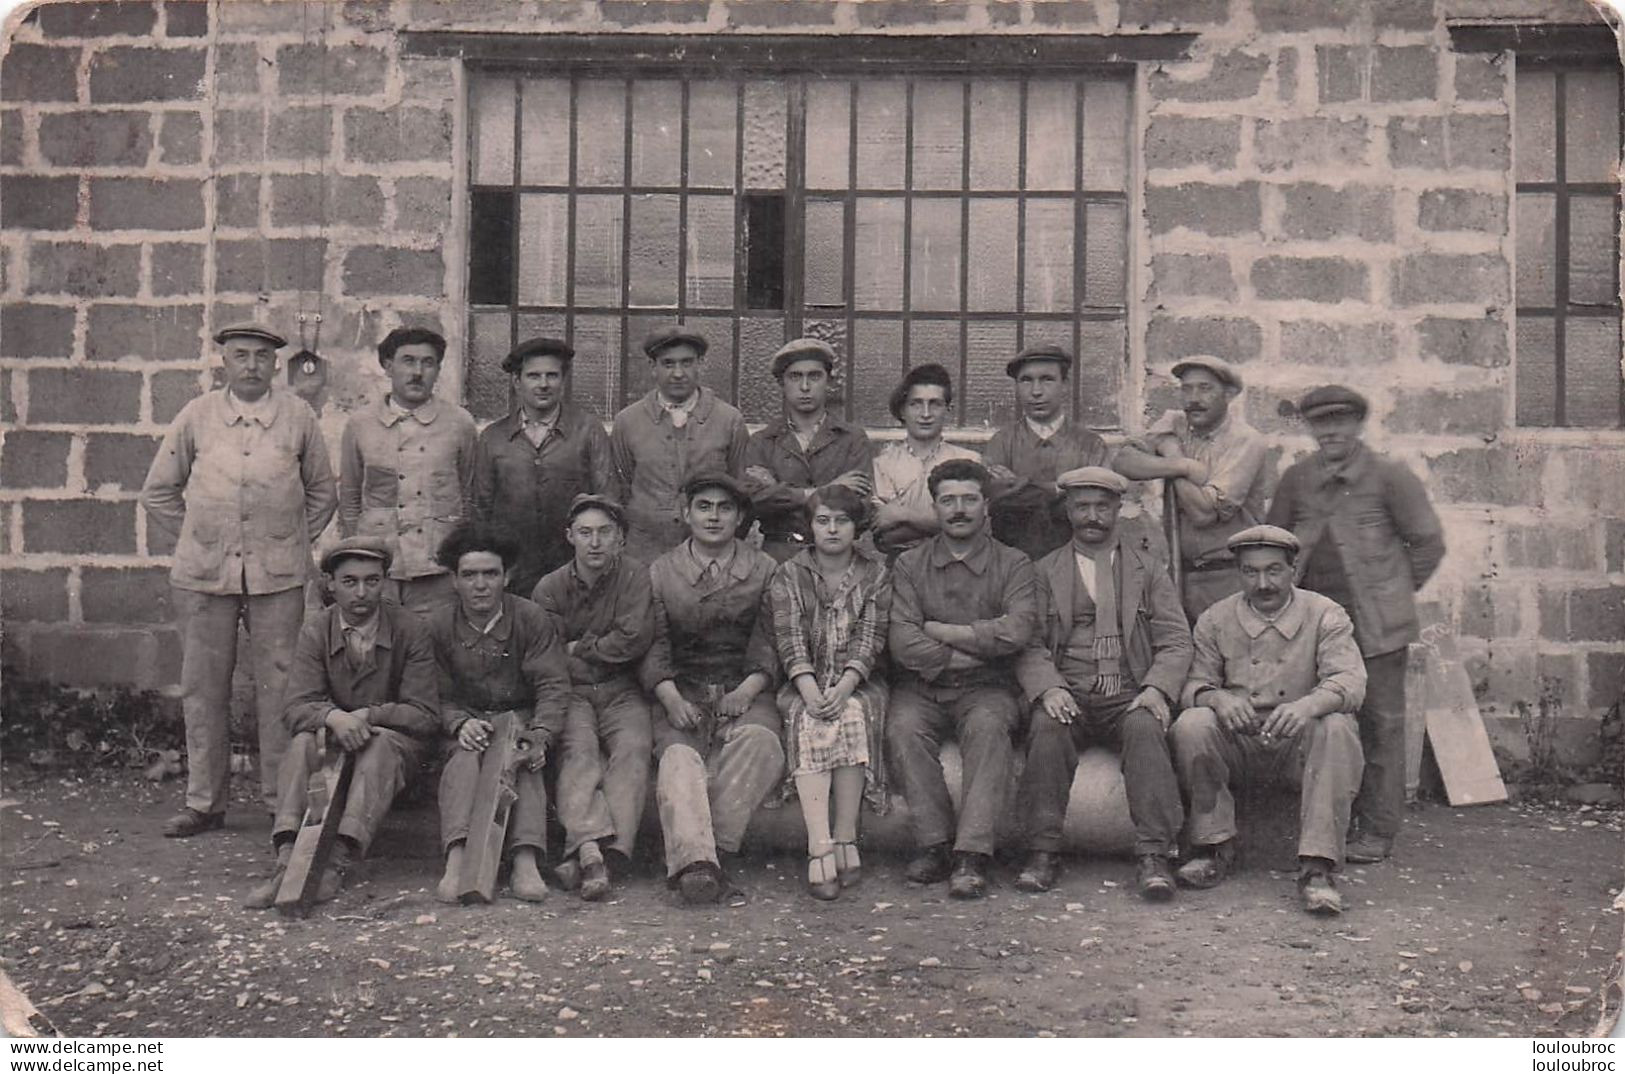 CARTE PHOTO GROUPE D'OUVRIERS - To Identify